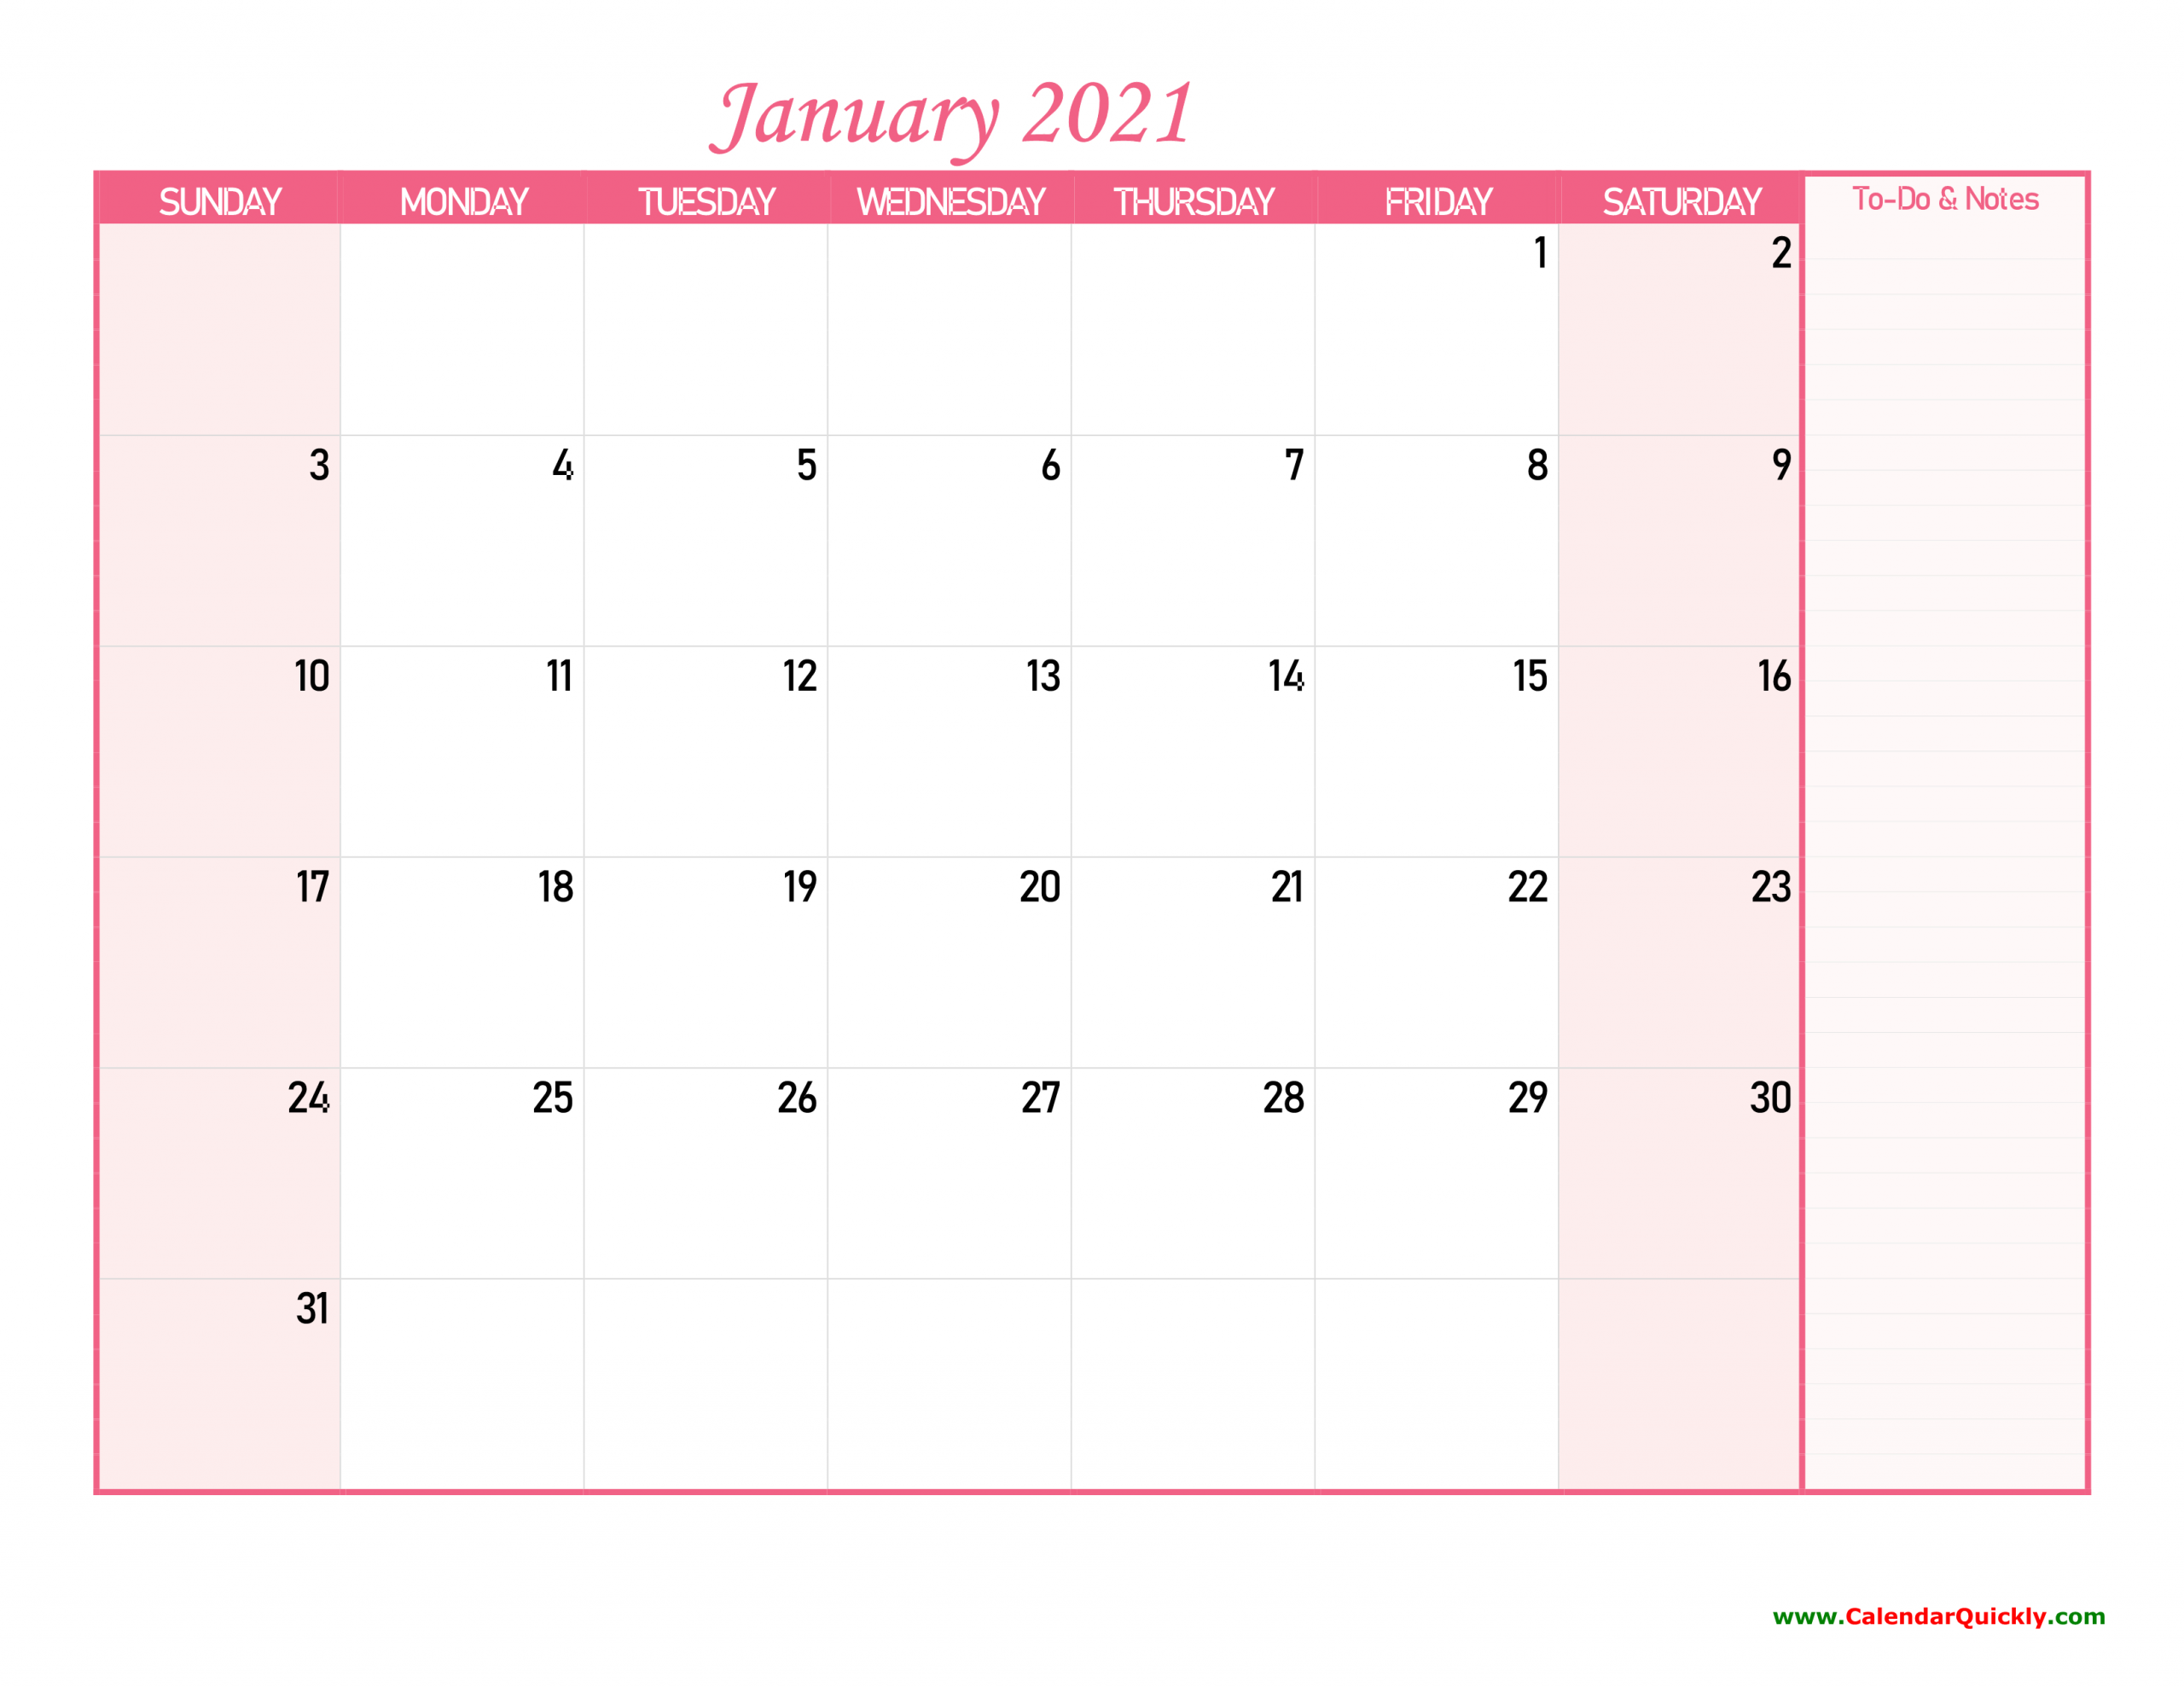 Monthly Calendar 2021 With Notes | Calendar Quickly